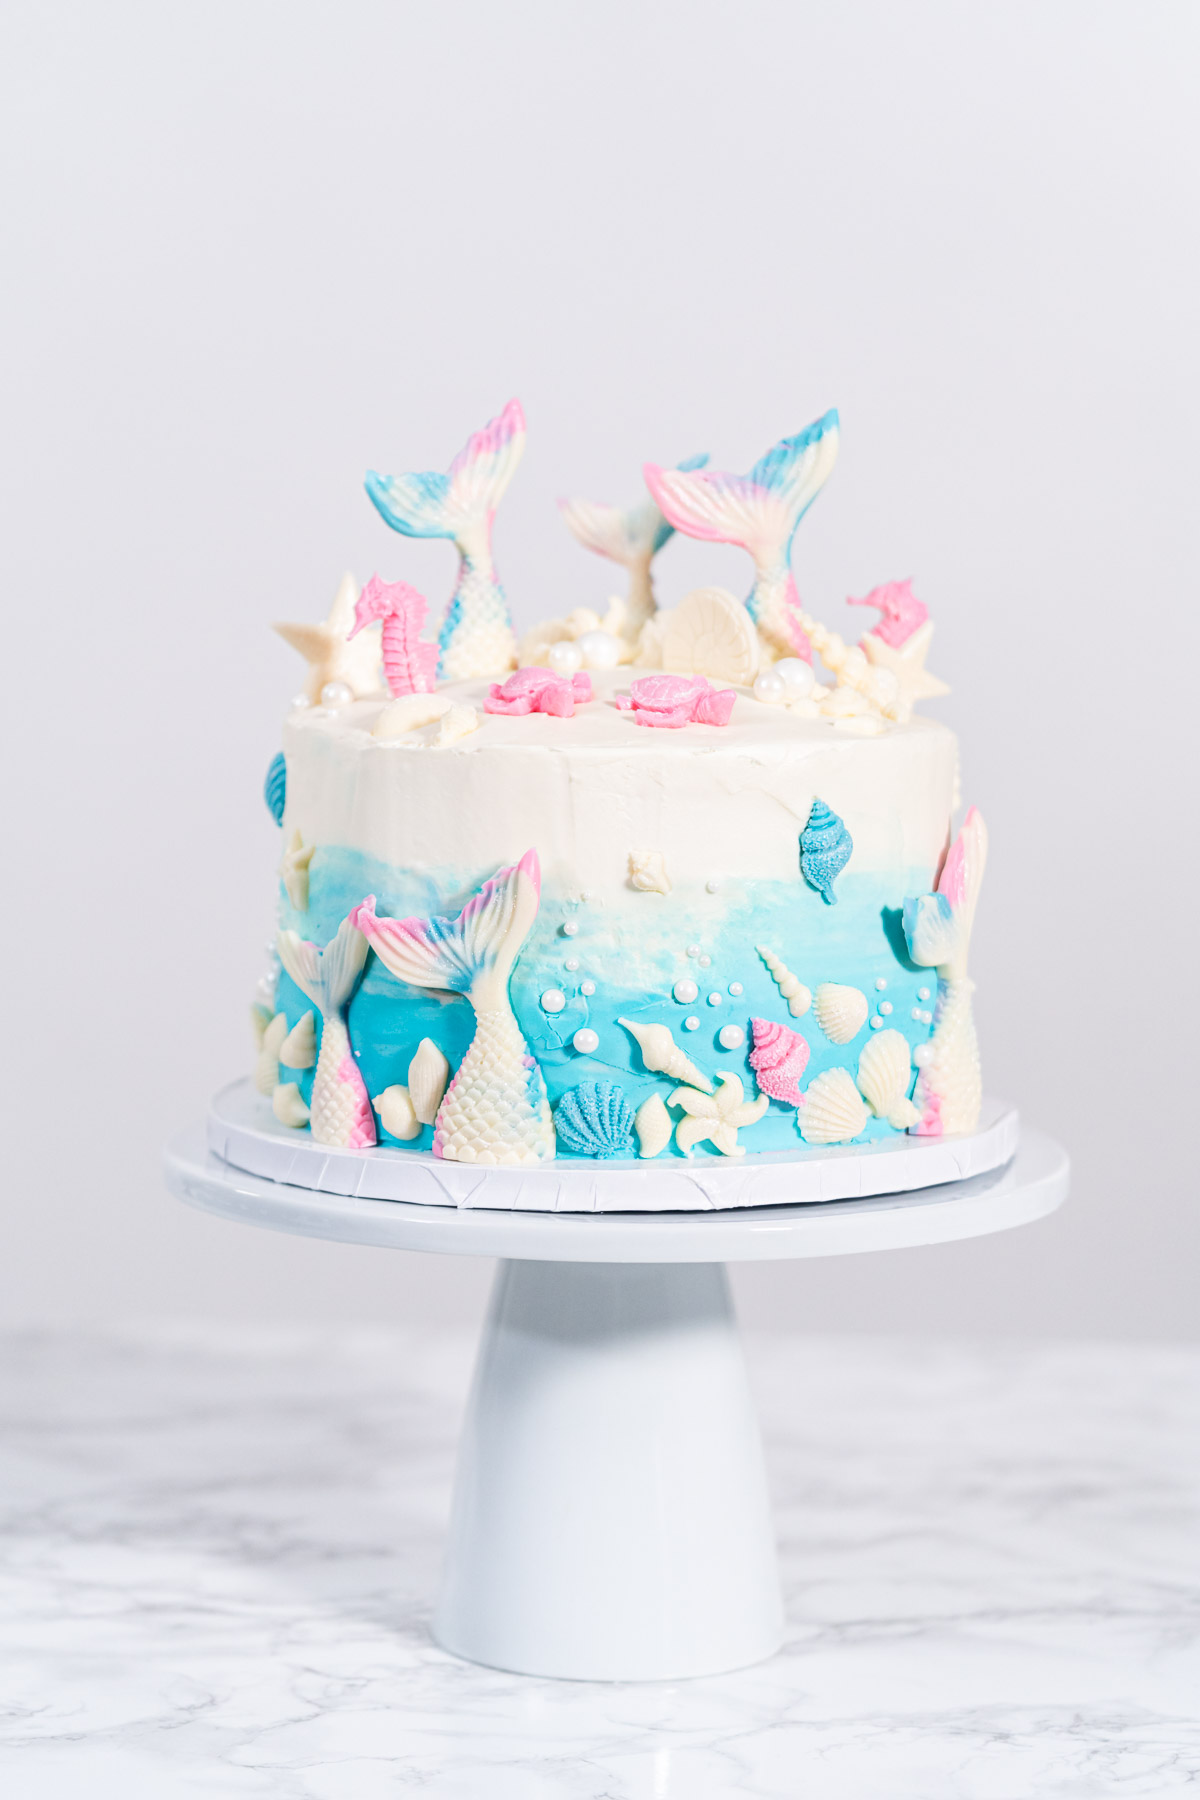 Mermaid cake! I am actually really happy with this one 💜 : r/Baking